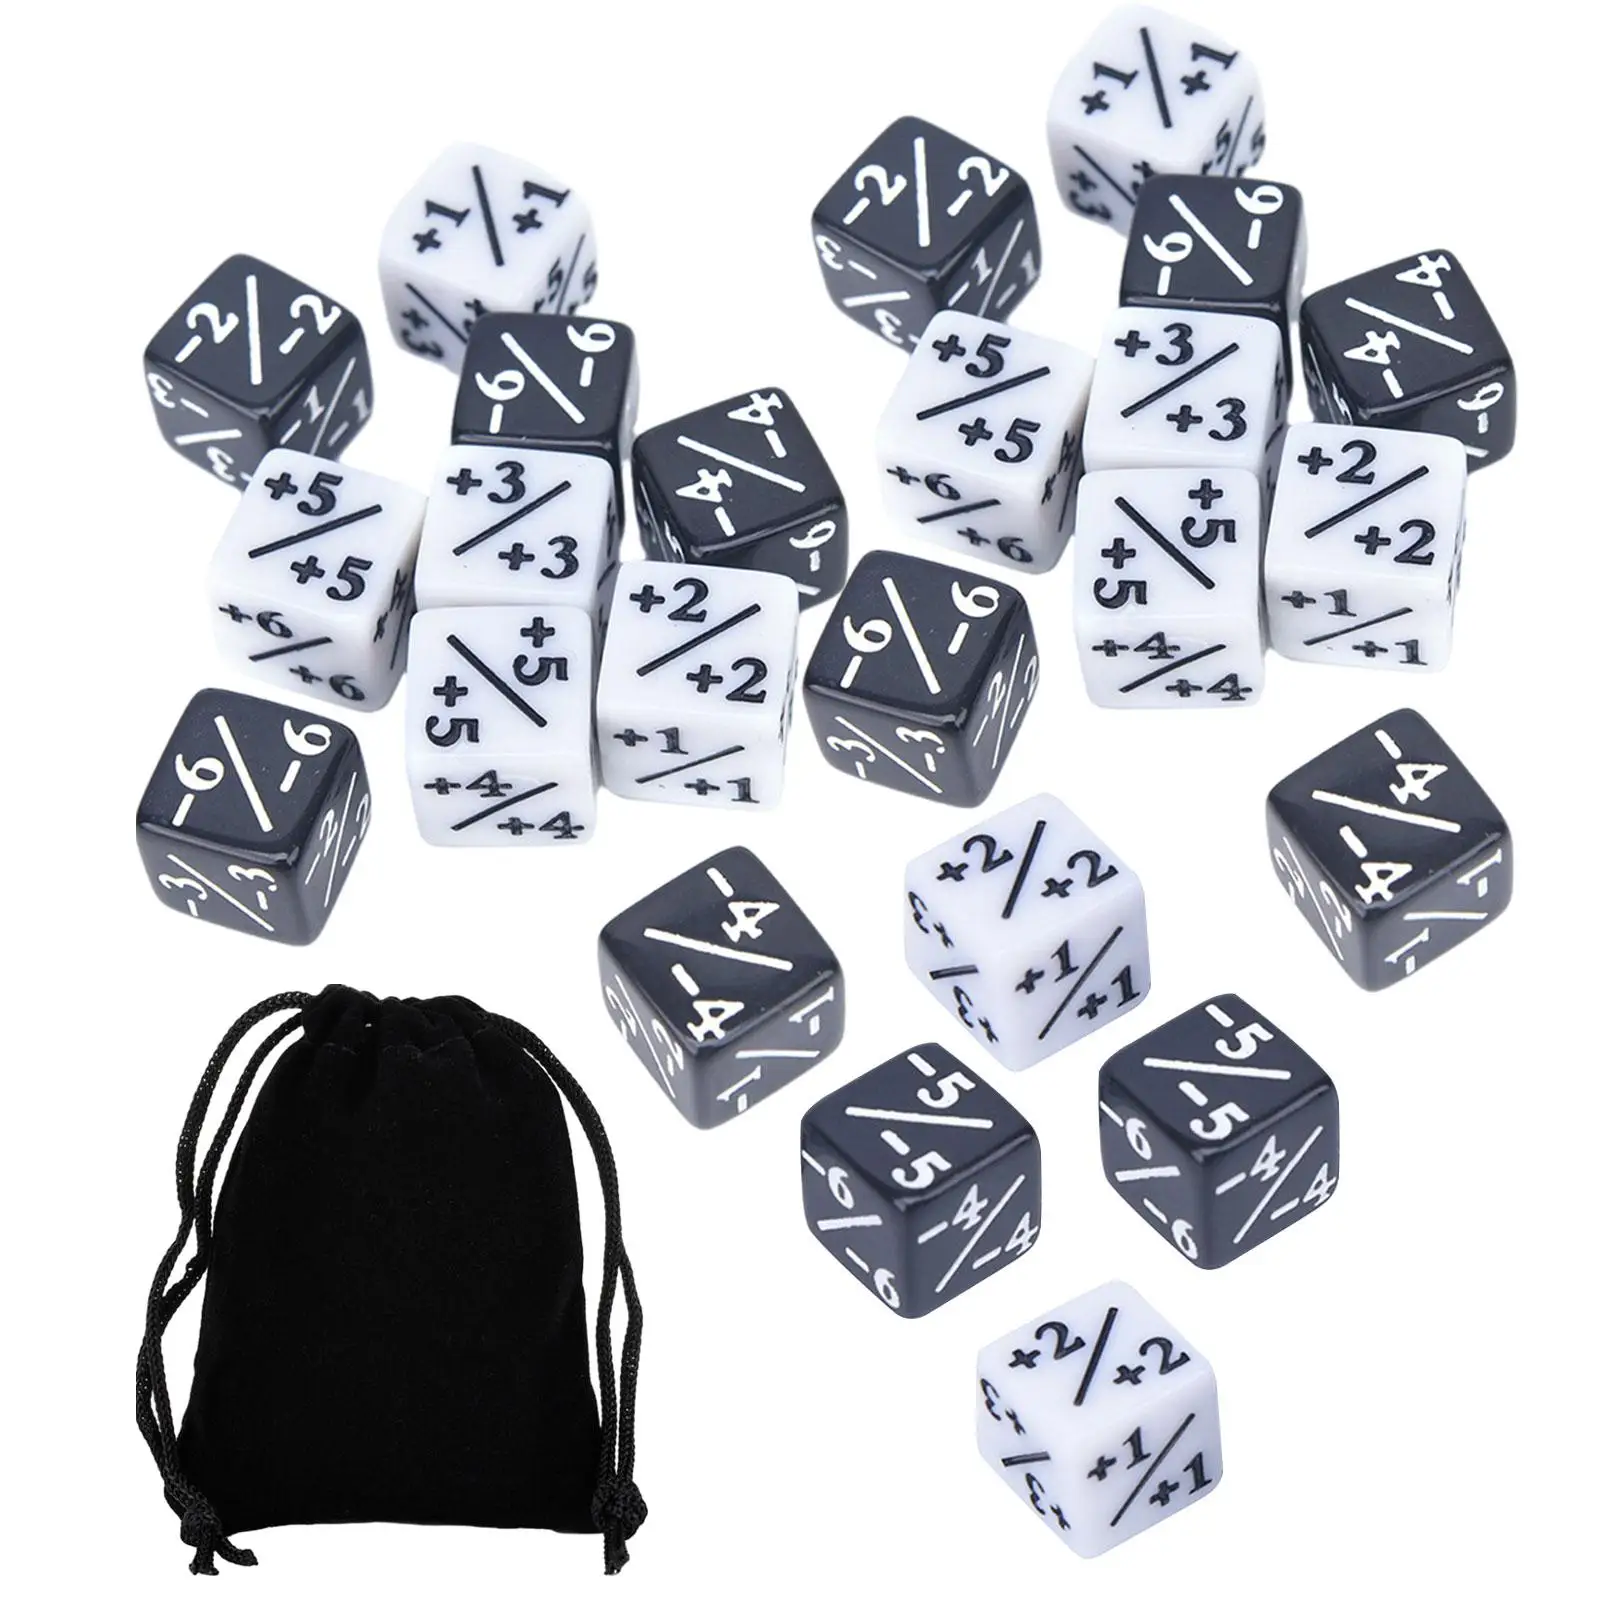 24Pcs Counter Token Dice Table Game Dices Six Sided Dice Set for Party Supplies Role Playing Children Toys Kids Toys Board Game